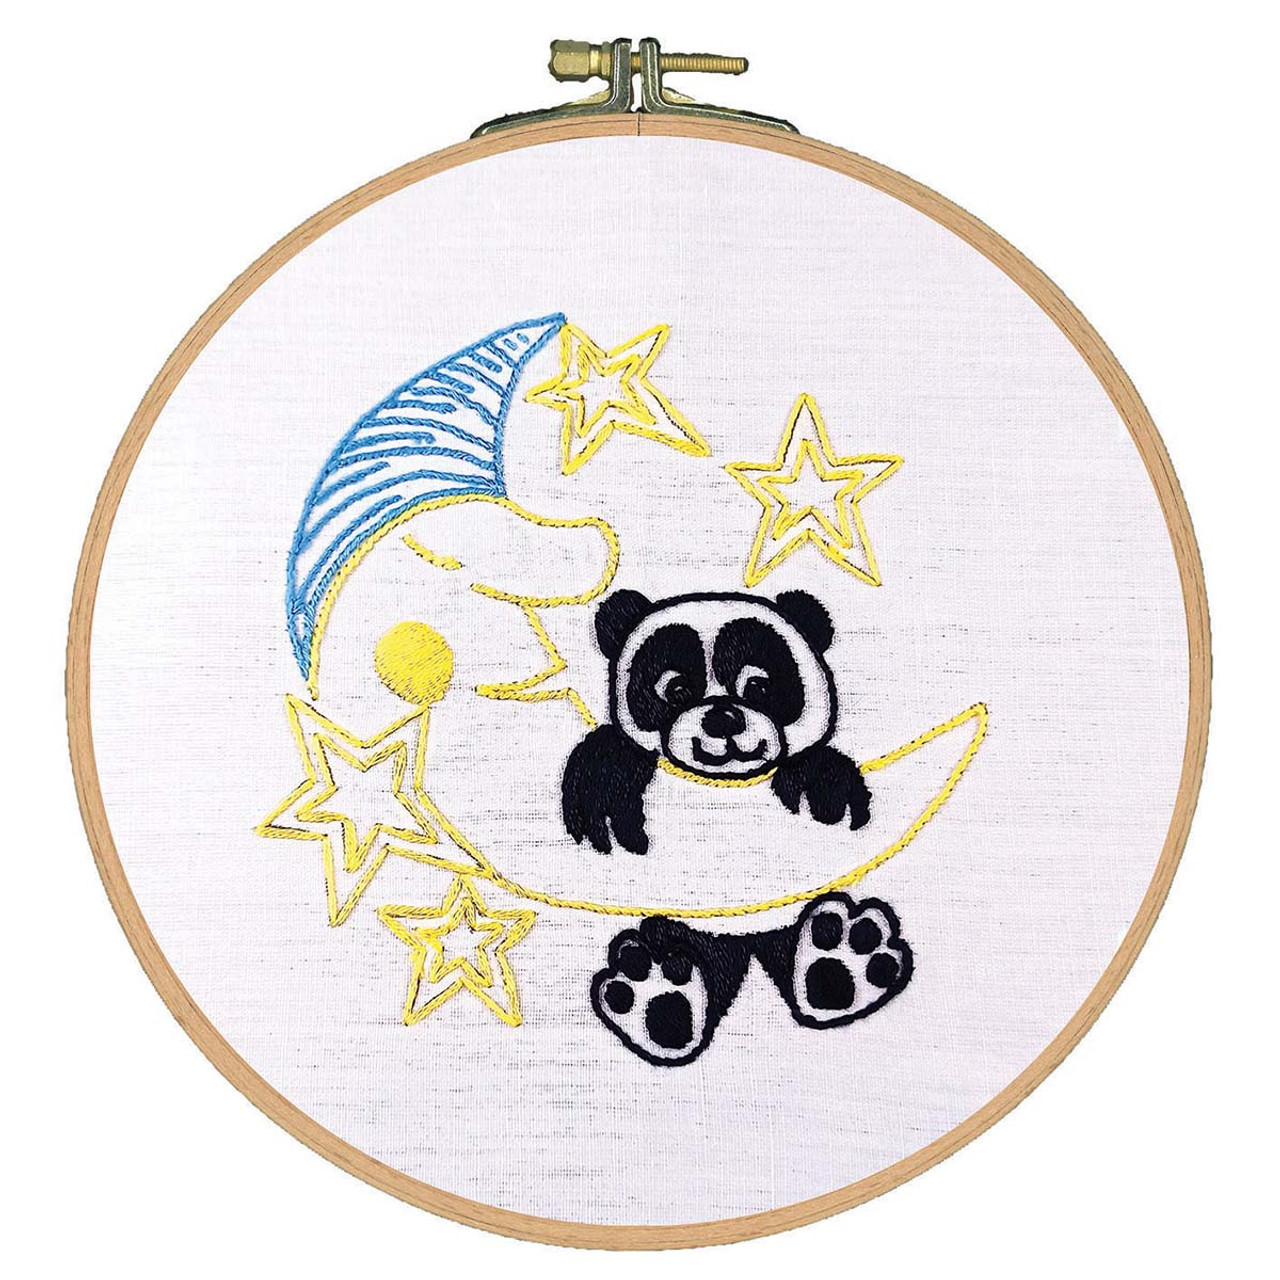 Cute cross stitch kit Baby Panda - Beginners embroidery with counted pattern